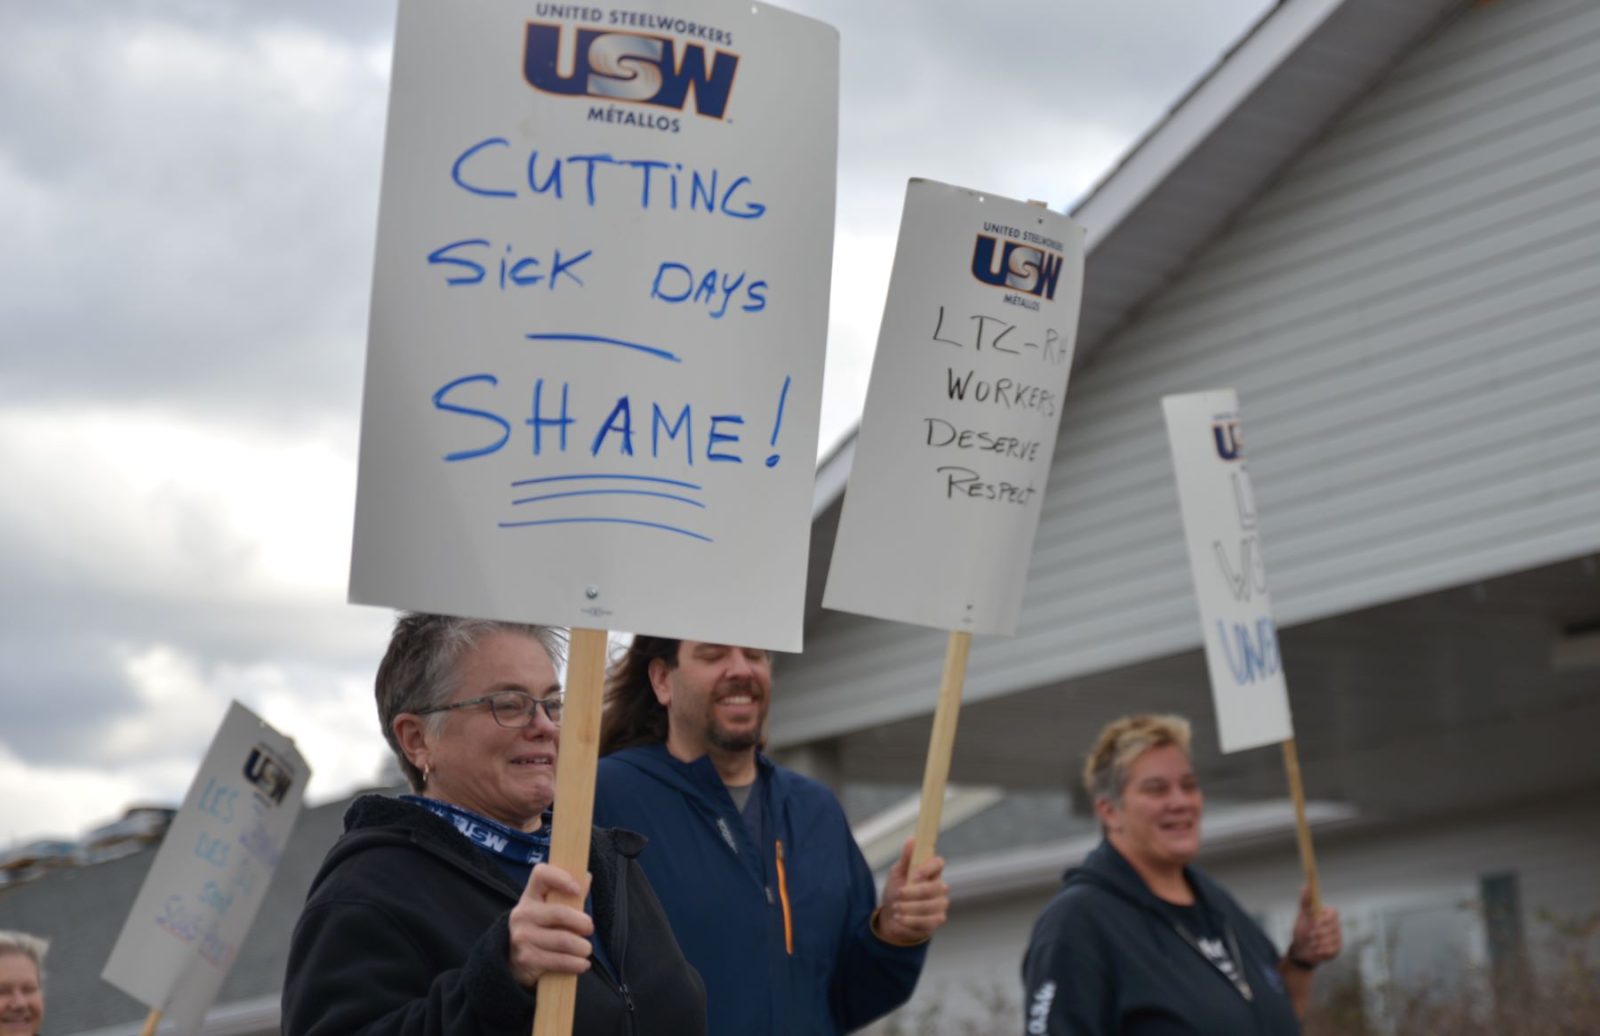 Pinecrest workers picket for sick days